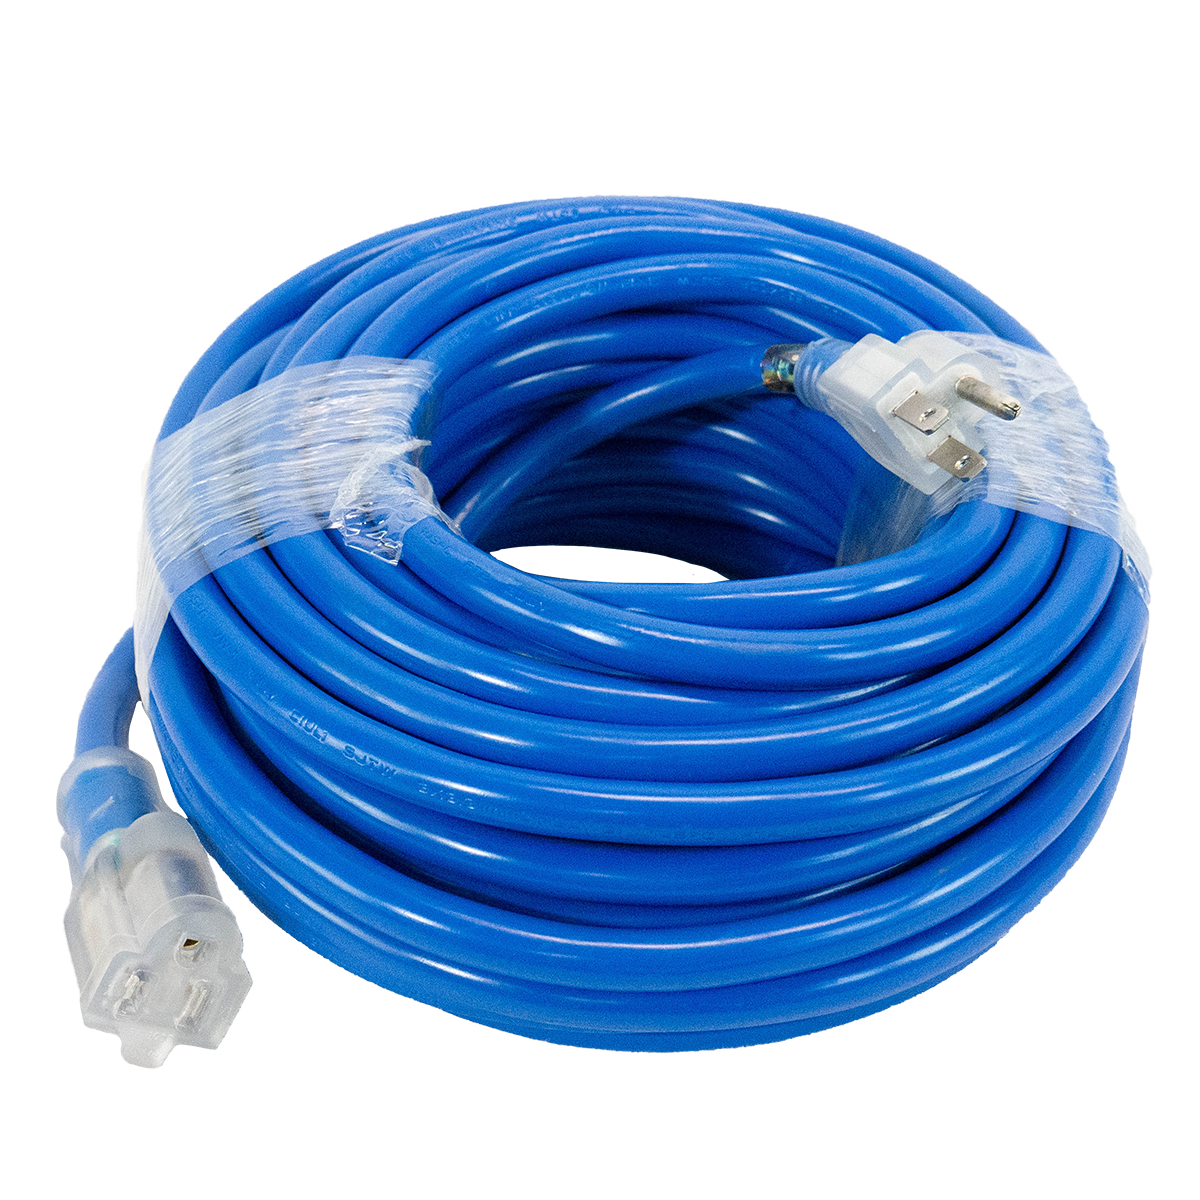 Lighted Power Cord - 50ft